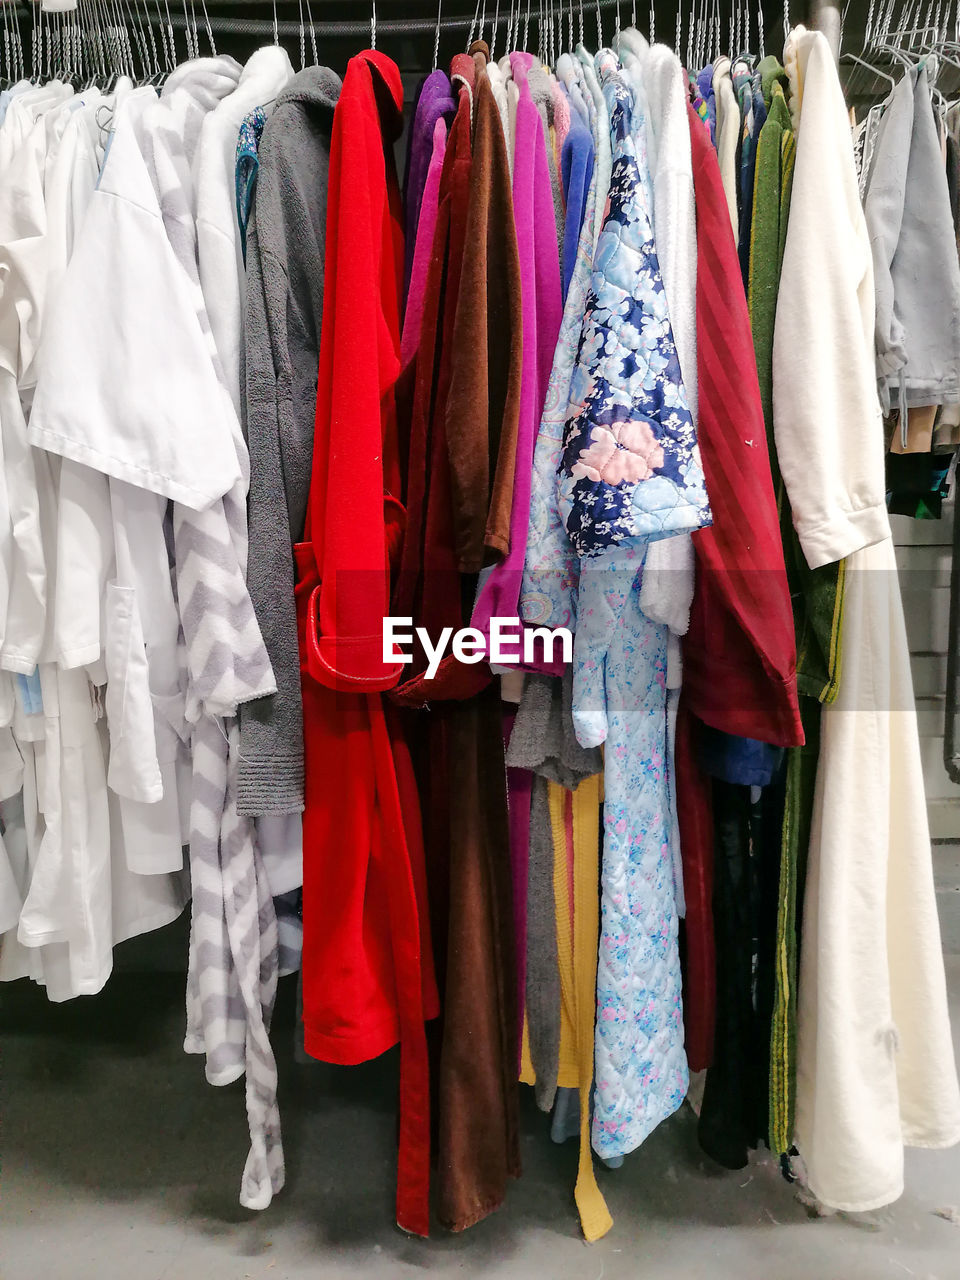 Clothes hanging in a row at store